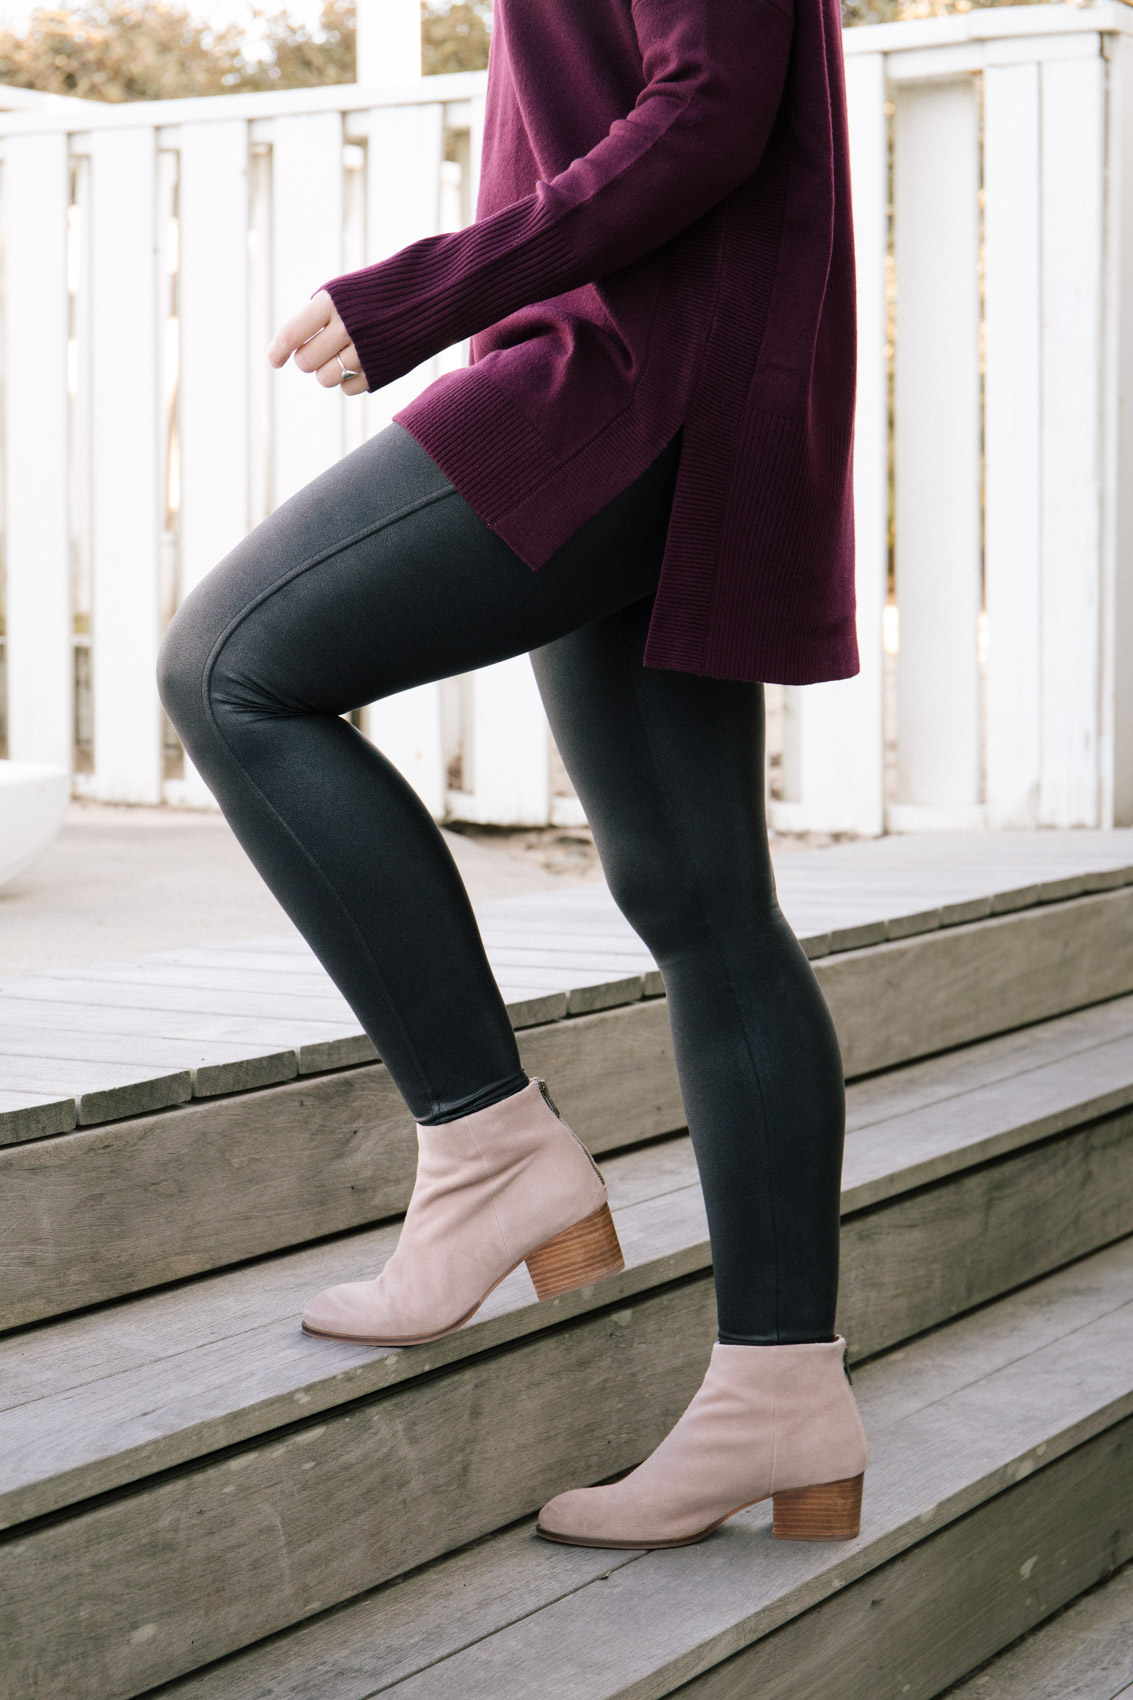 SPANX - Never go wrong with Faux Leather Leggings. Featured here our  original Faux Leather Legging in wine. Available in size XS-3X. 📸:  @peacelovestyleblog